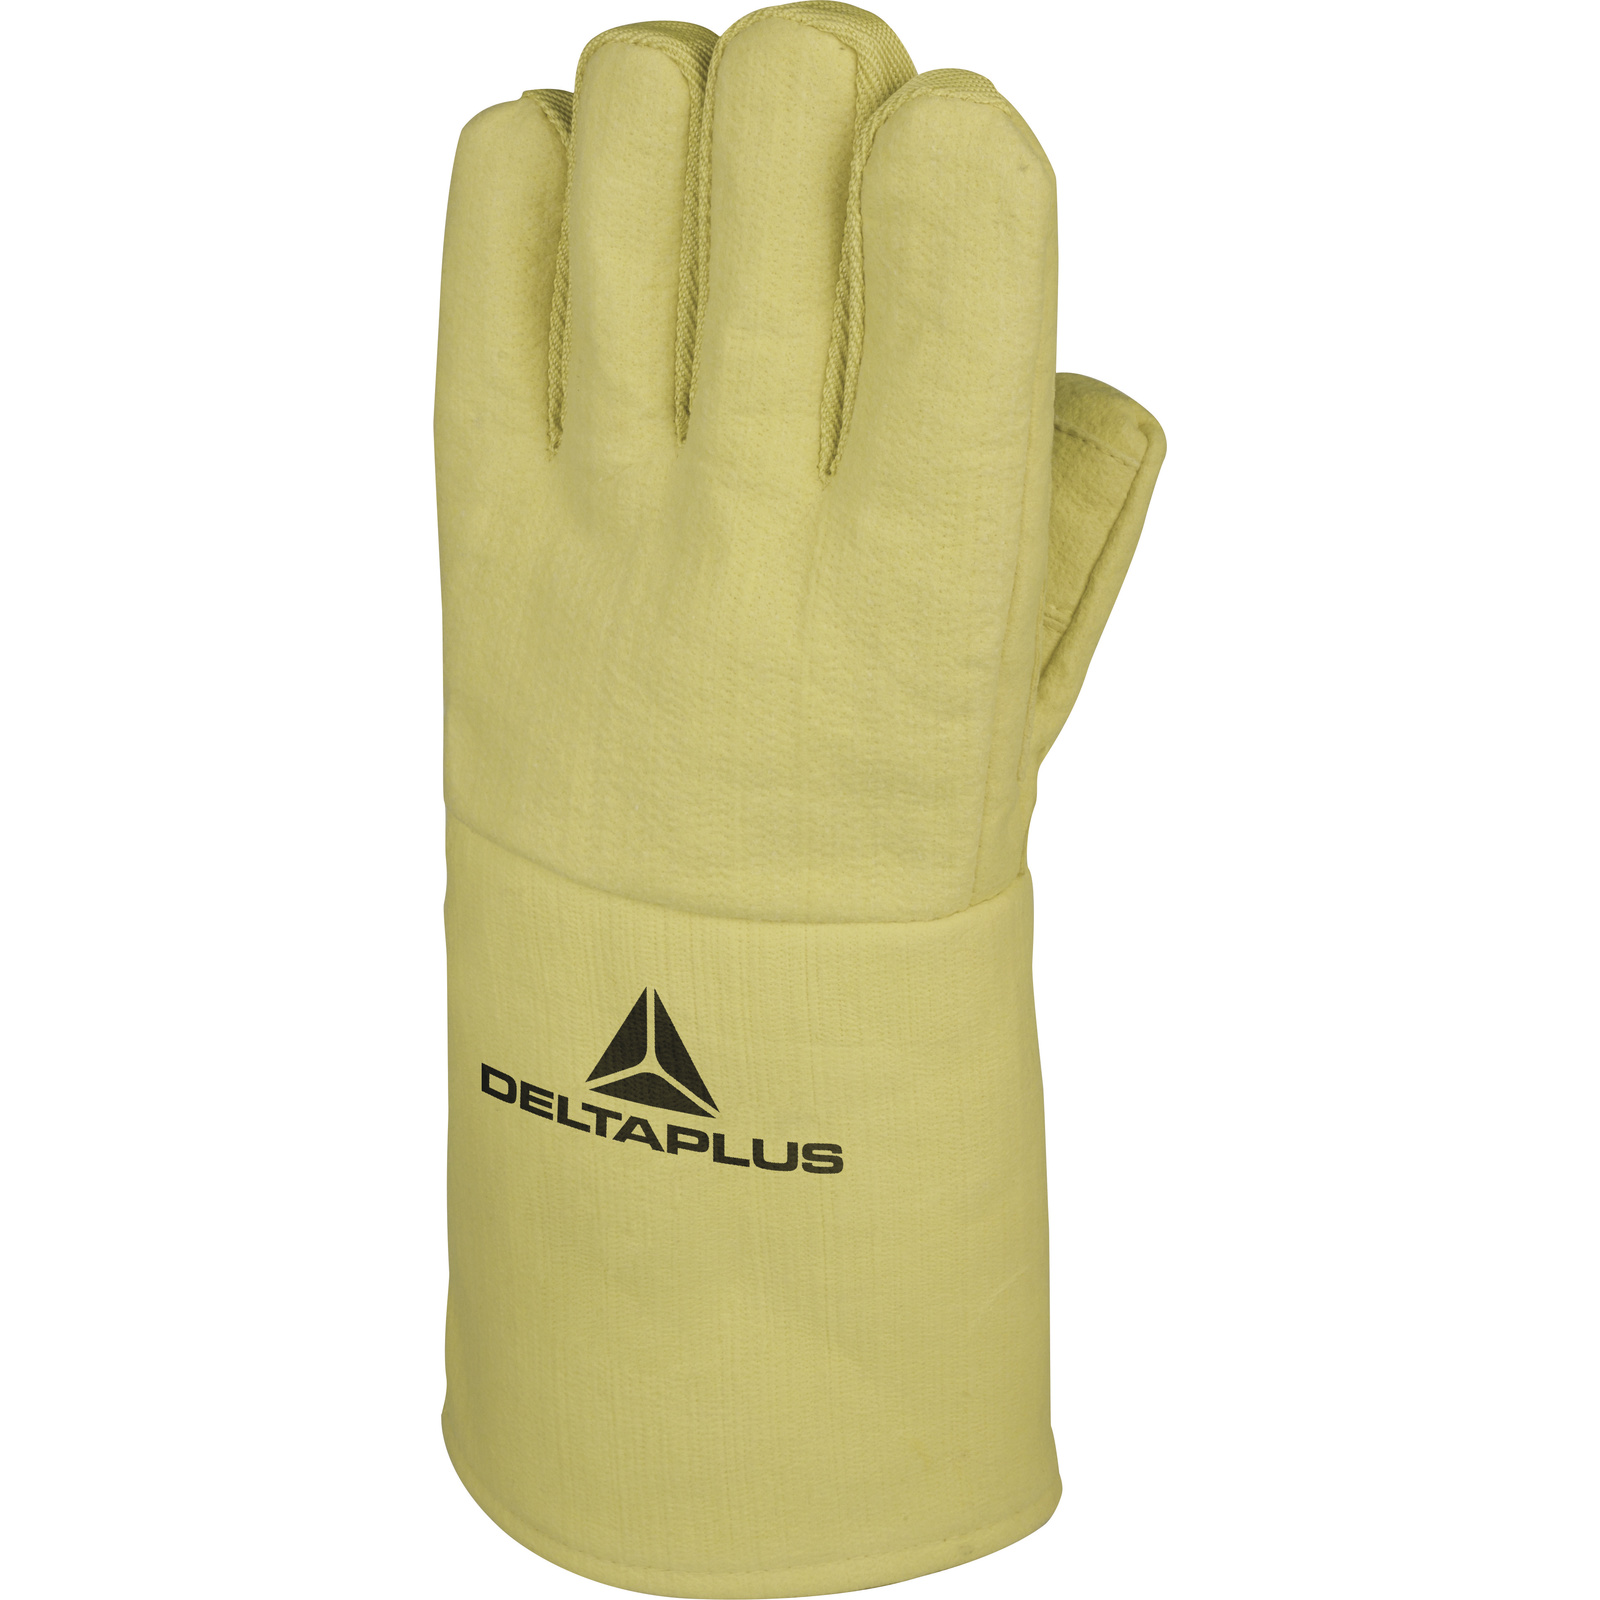 CUT RESISTANT And HEAT RESISTANT GLOVE IN BD